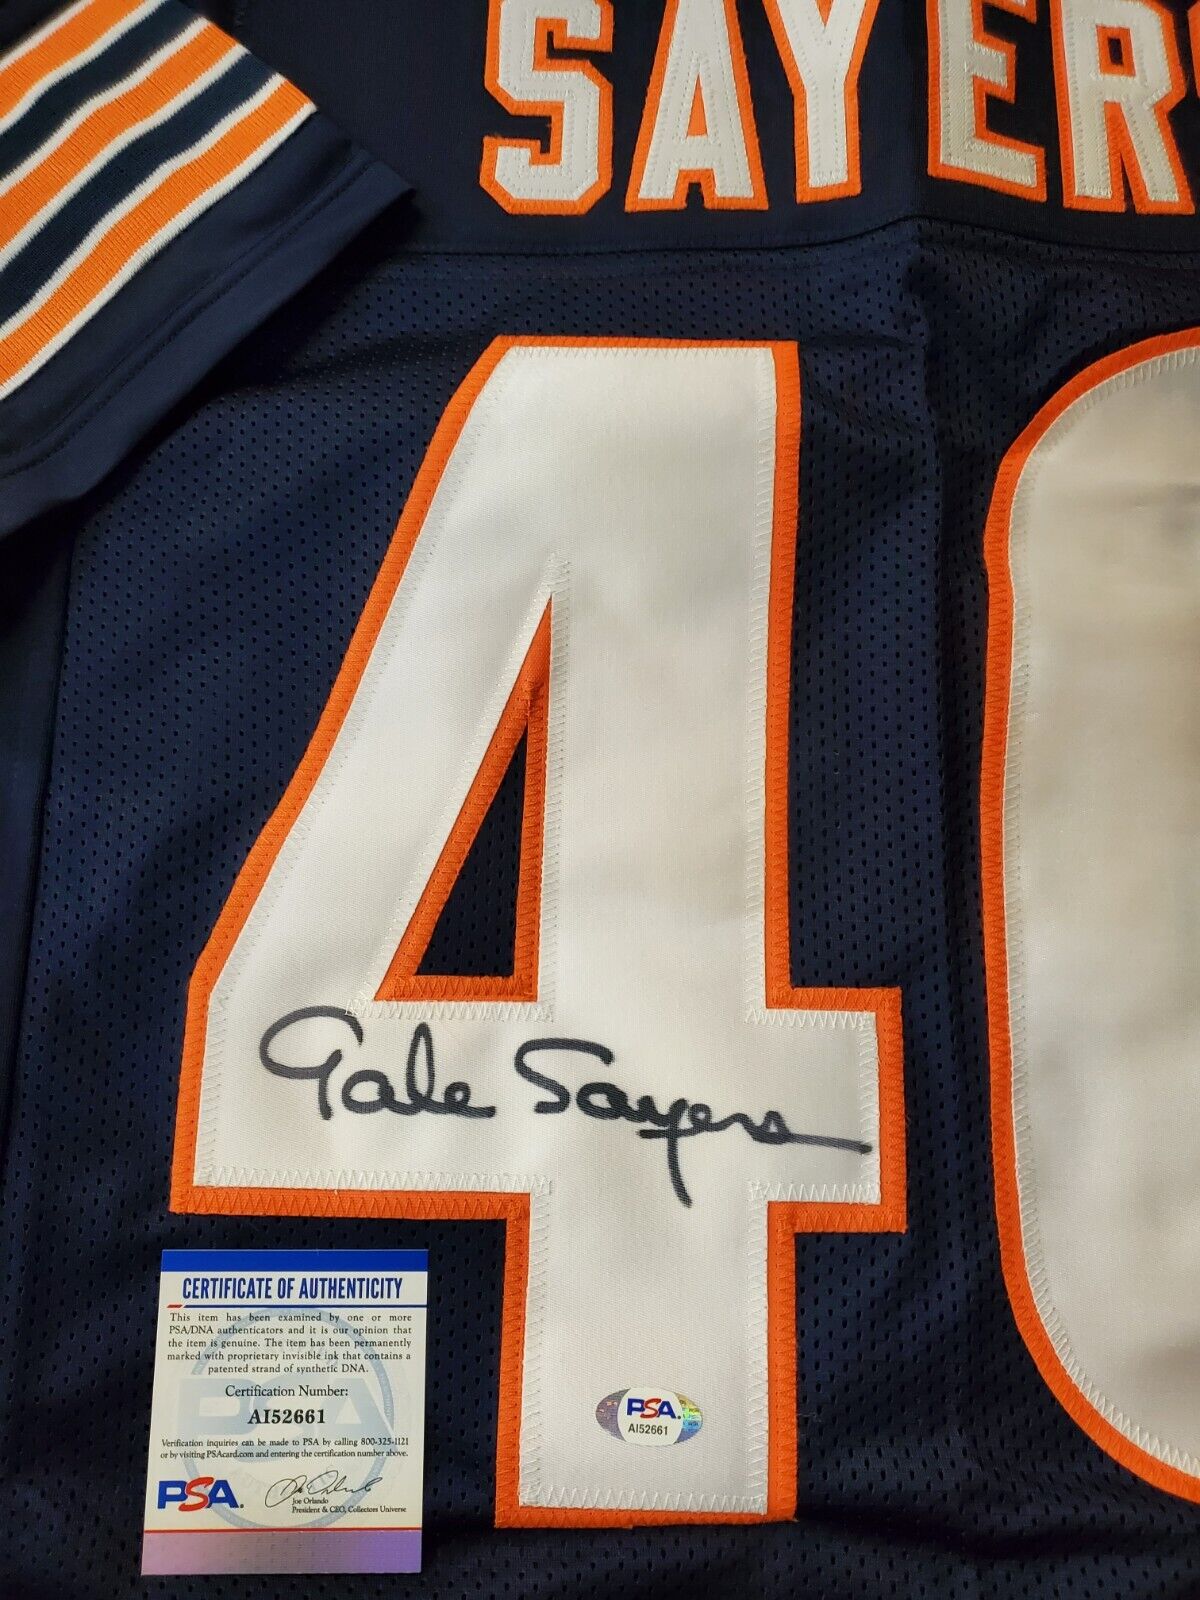 Gale Sayers Autographed Chicago Bears Football NFL Jersey PSA